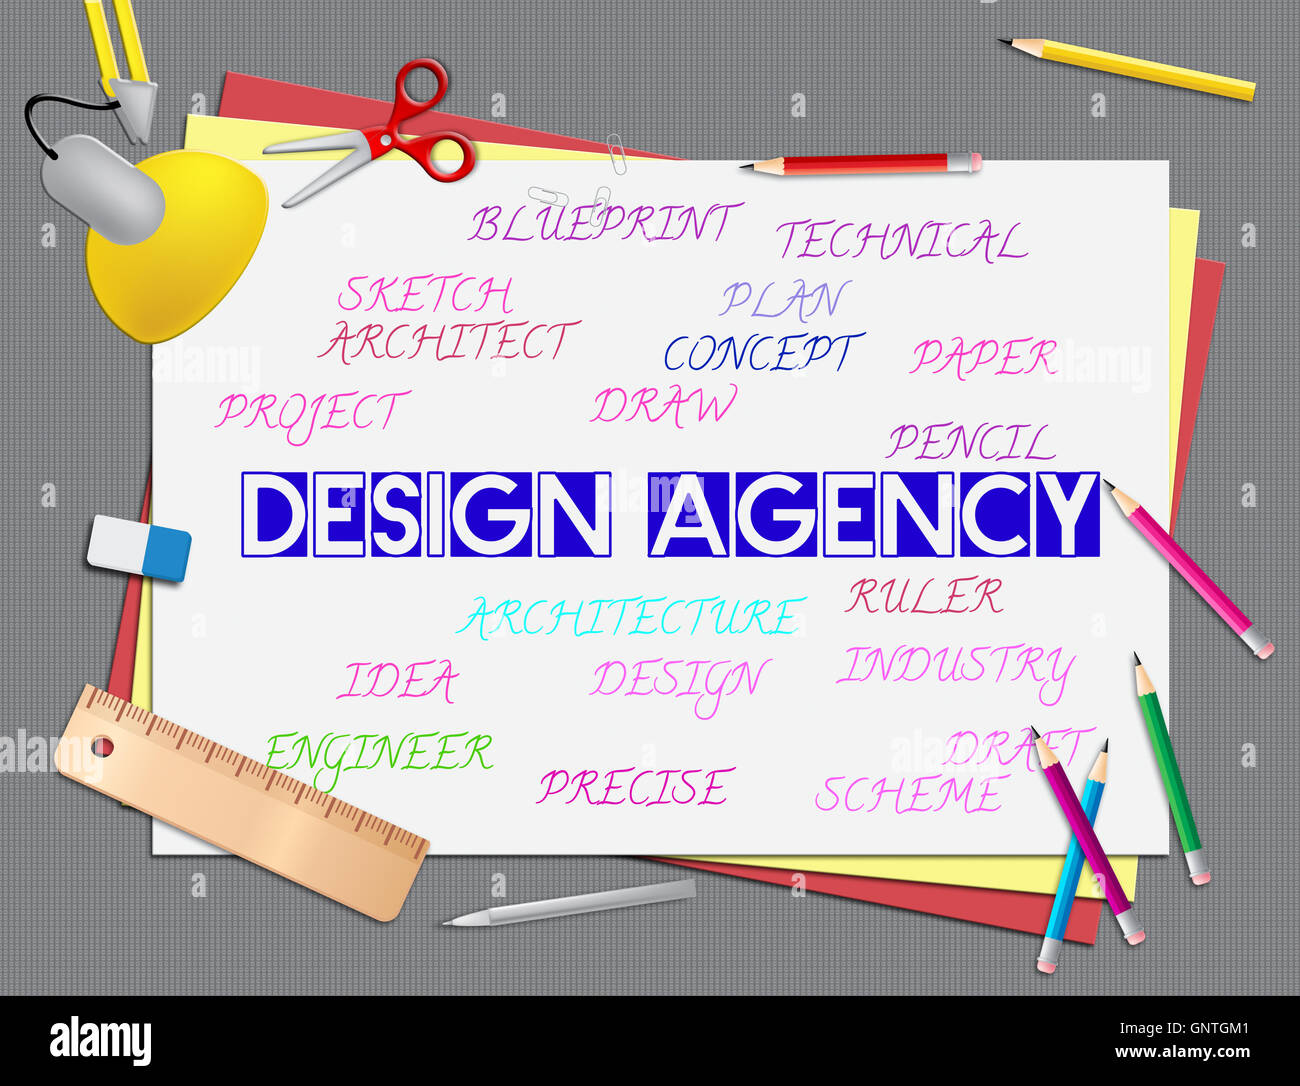 Design Agency Meaning Artwork And Creative Services Stock Photo